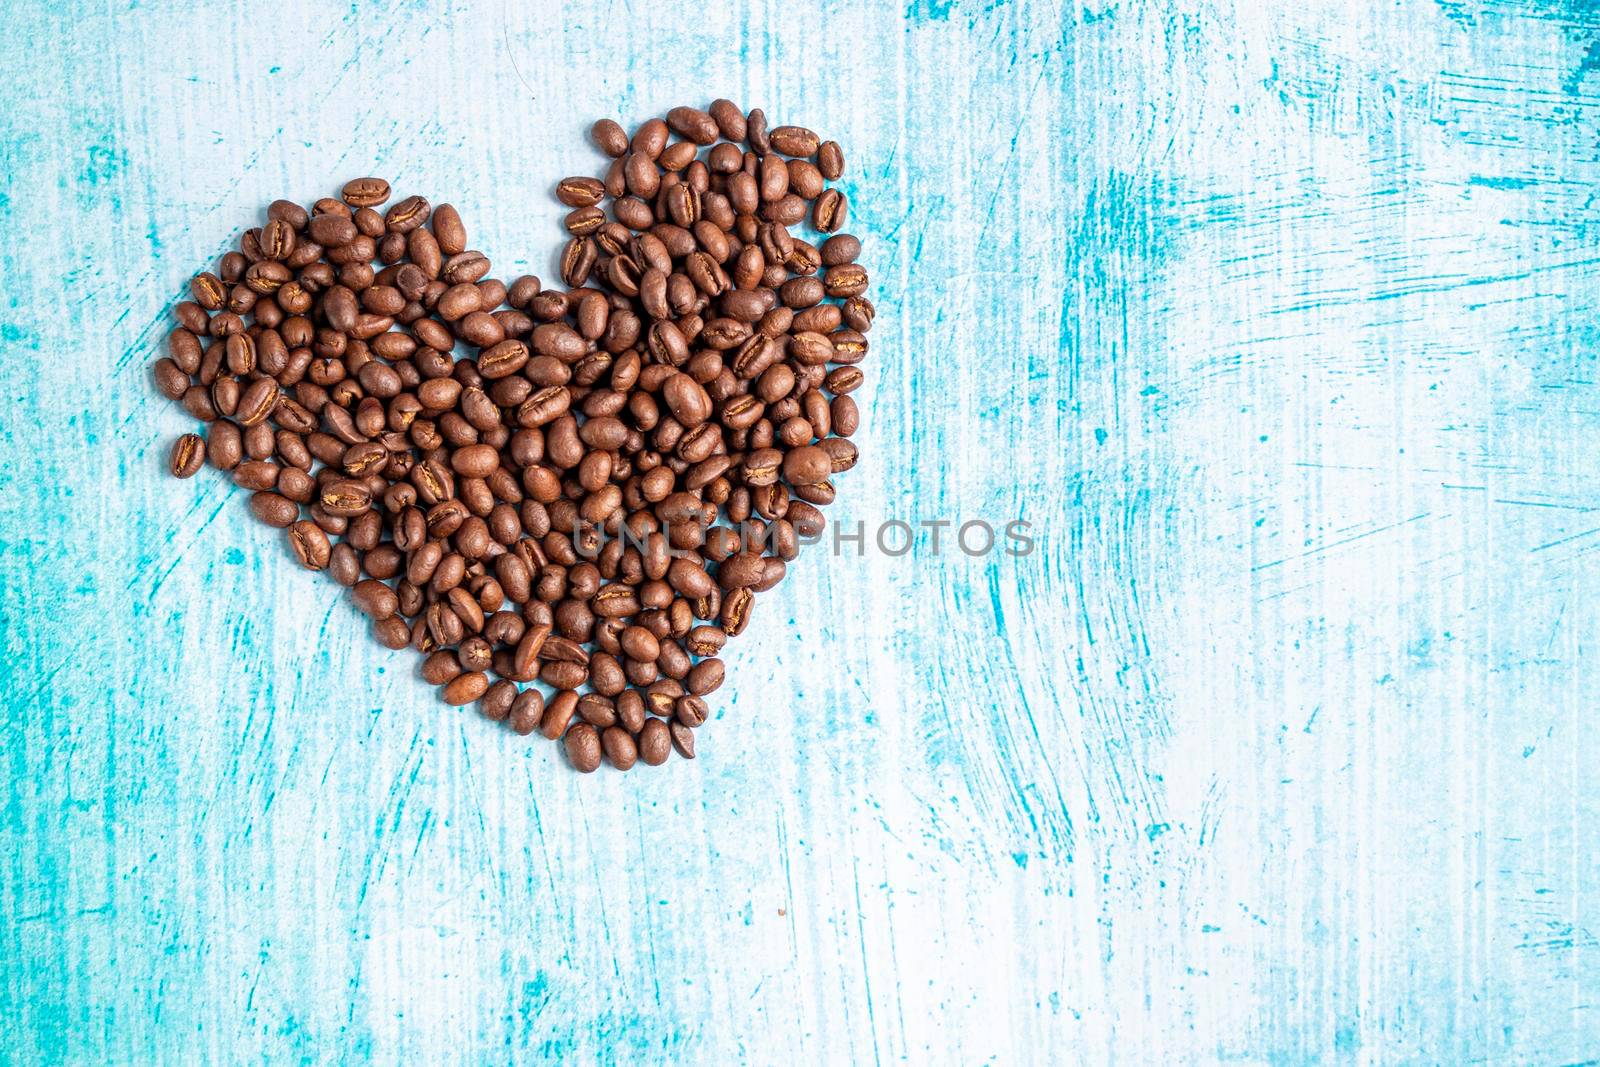 Heart shaped coffee grains on aquamarine background by eagg13